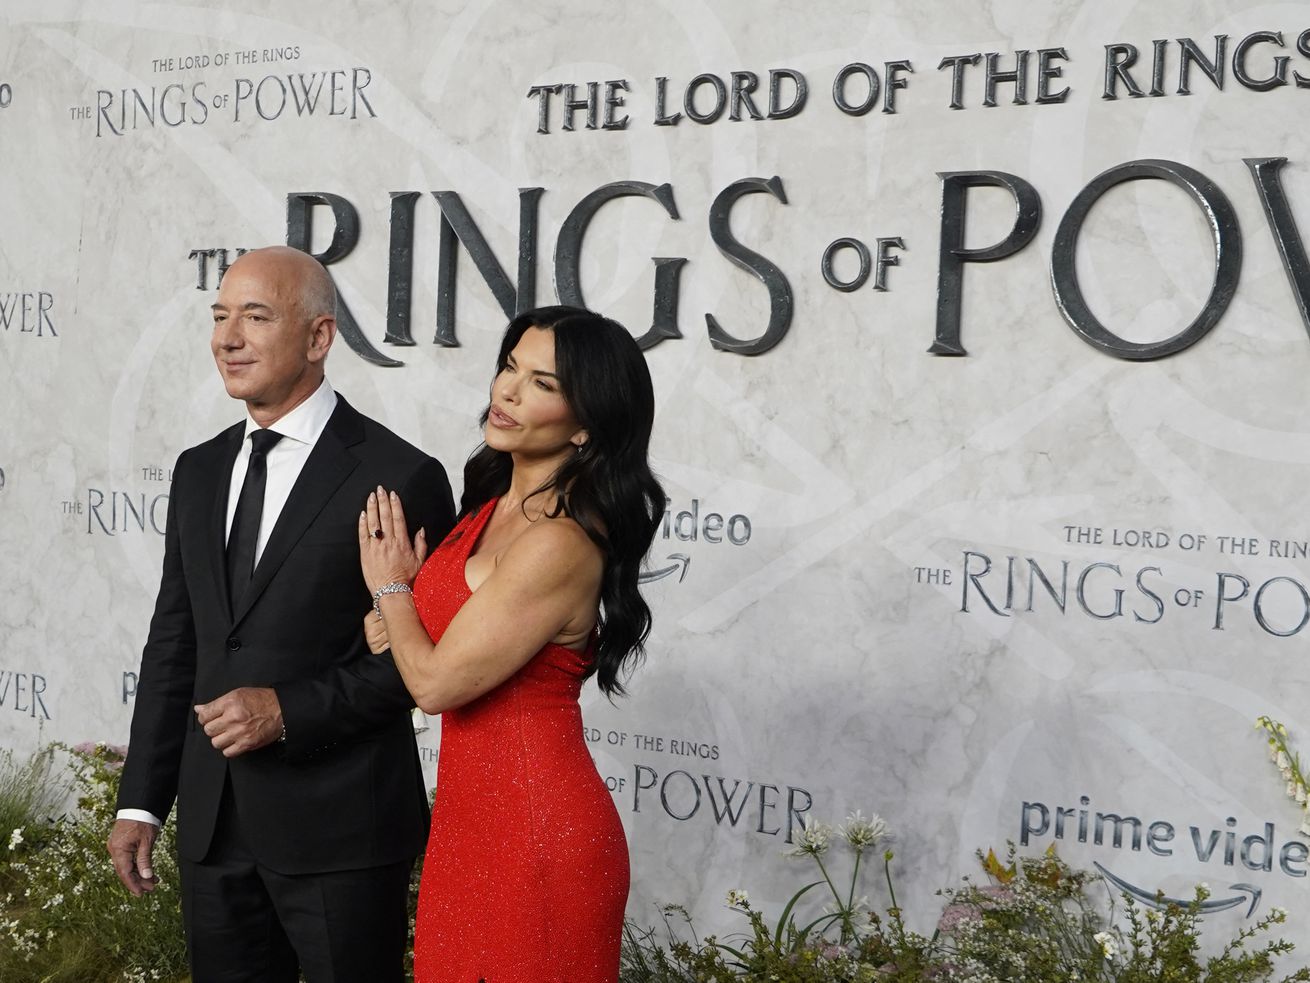 Jeff Bezos, in a black suit, and Lauren Sanchez, in a red dress, are being photographed standing in front of a backdrop reading “The Lord of the Rings: Rings of Power.”